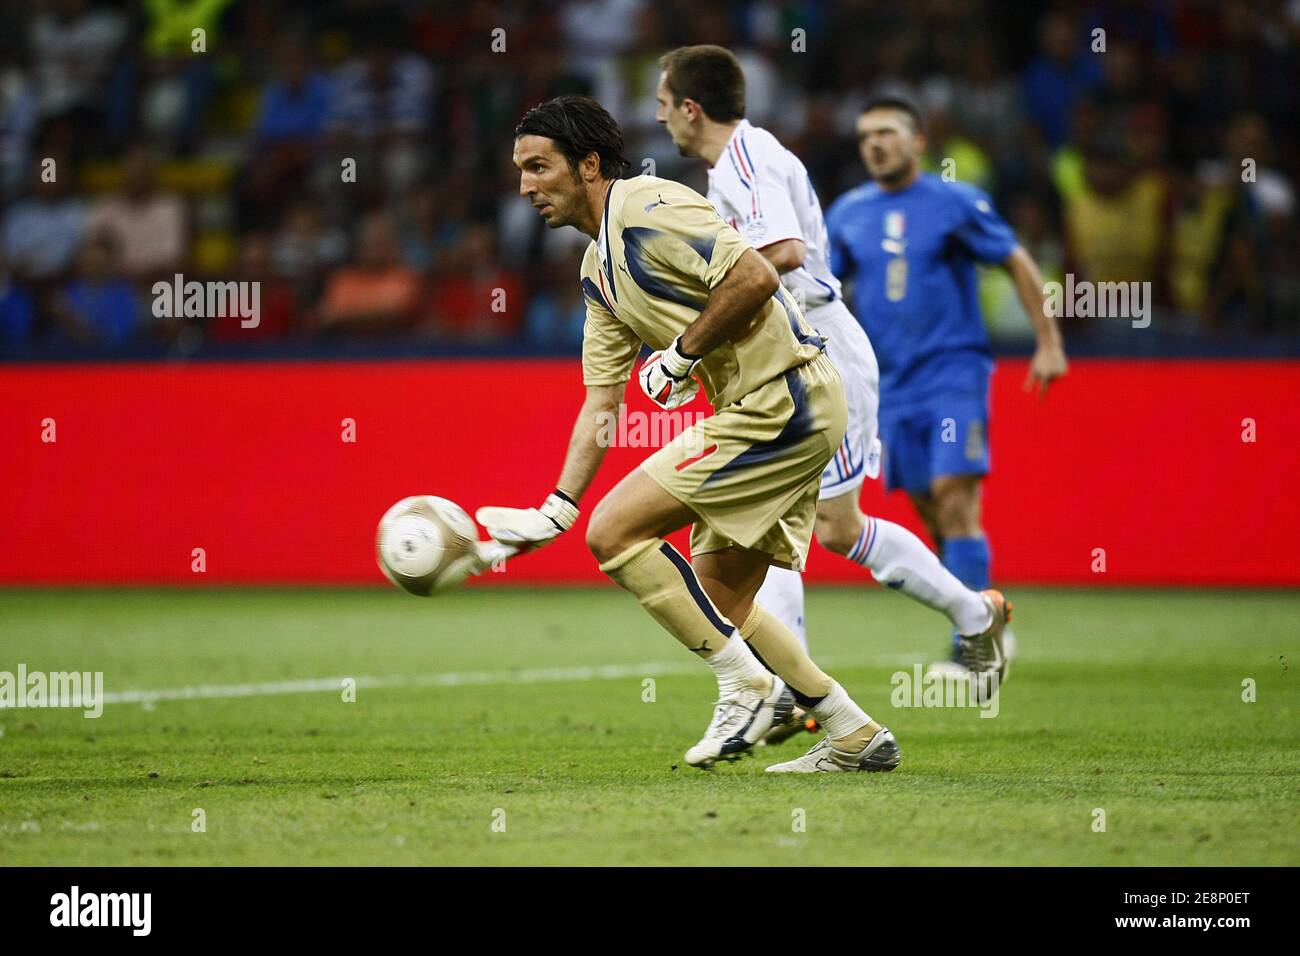 Italy's Gianluigi Buffon during the 2008 UEFA European Football Championship qualifying match Italy vs France in Milan, Italy, on September 9, 2007. The game ended in a draw 0-0. Photo by Christian Liewig/ABACAPRESS.COM Stock Photo